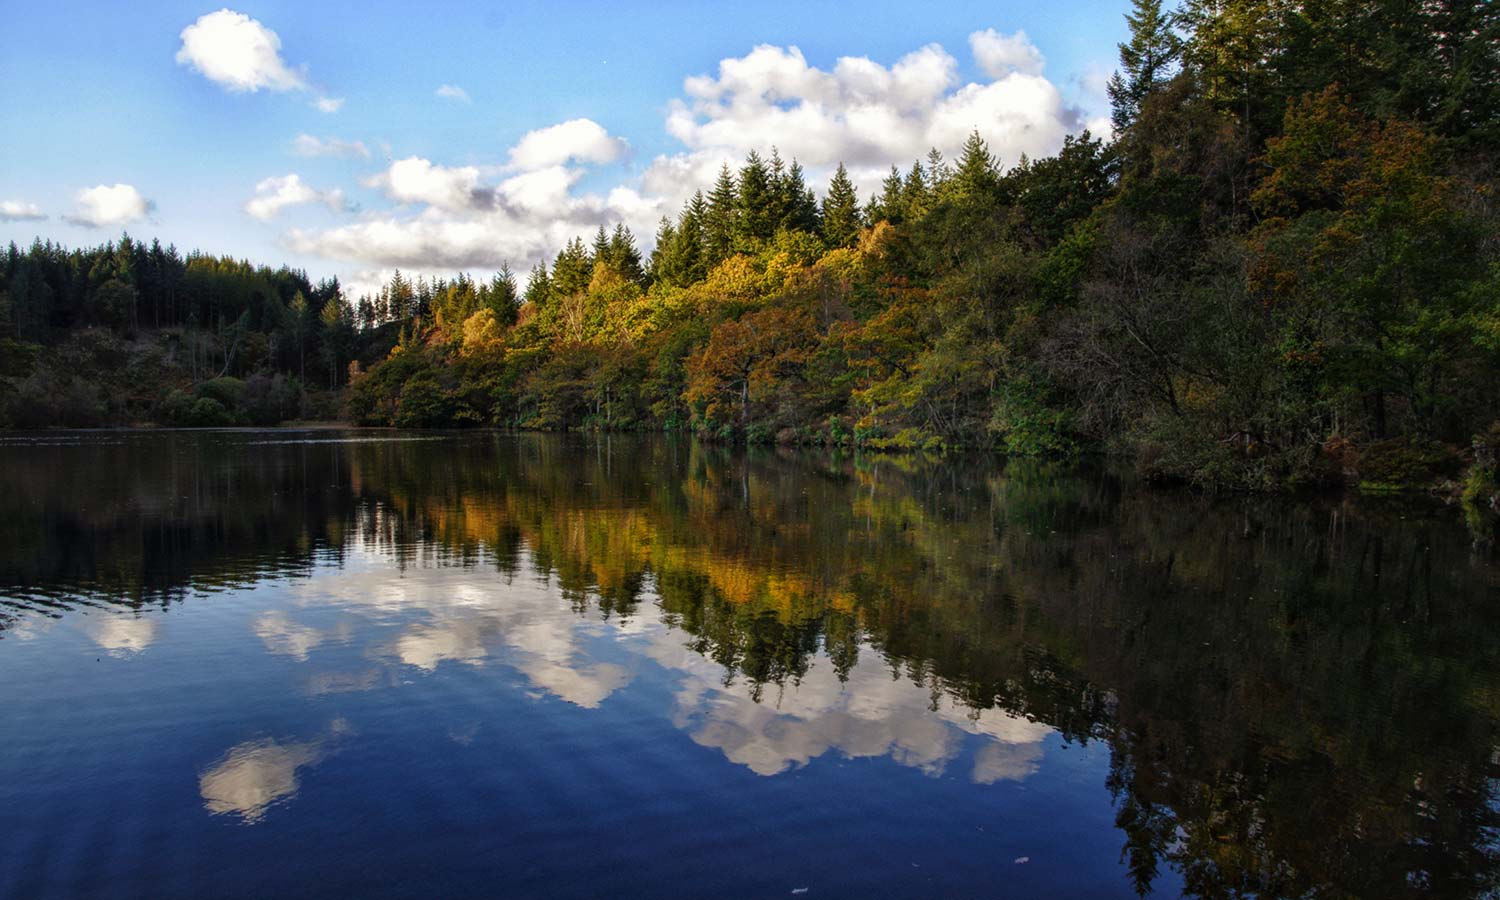 Visit betws y coed lakes, woodland and mountains